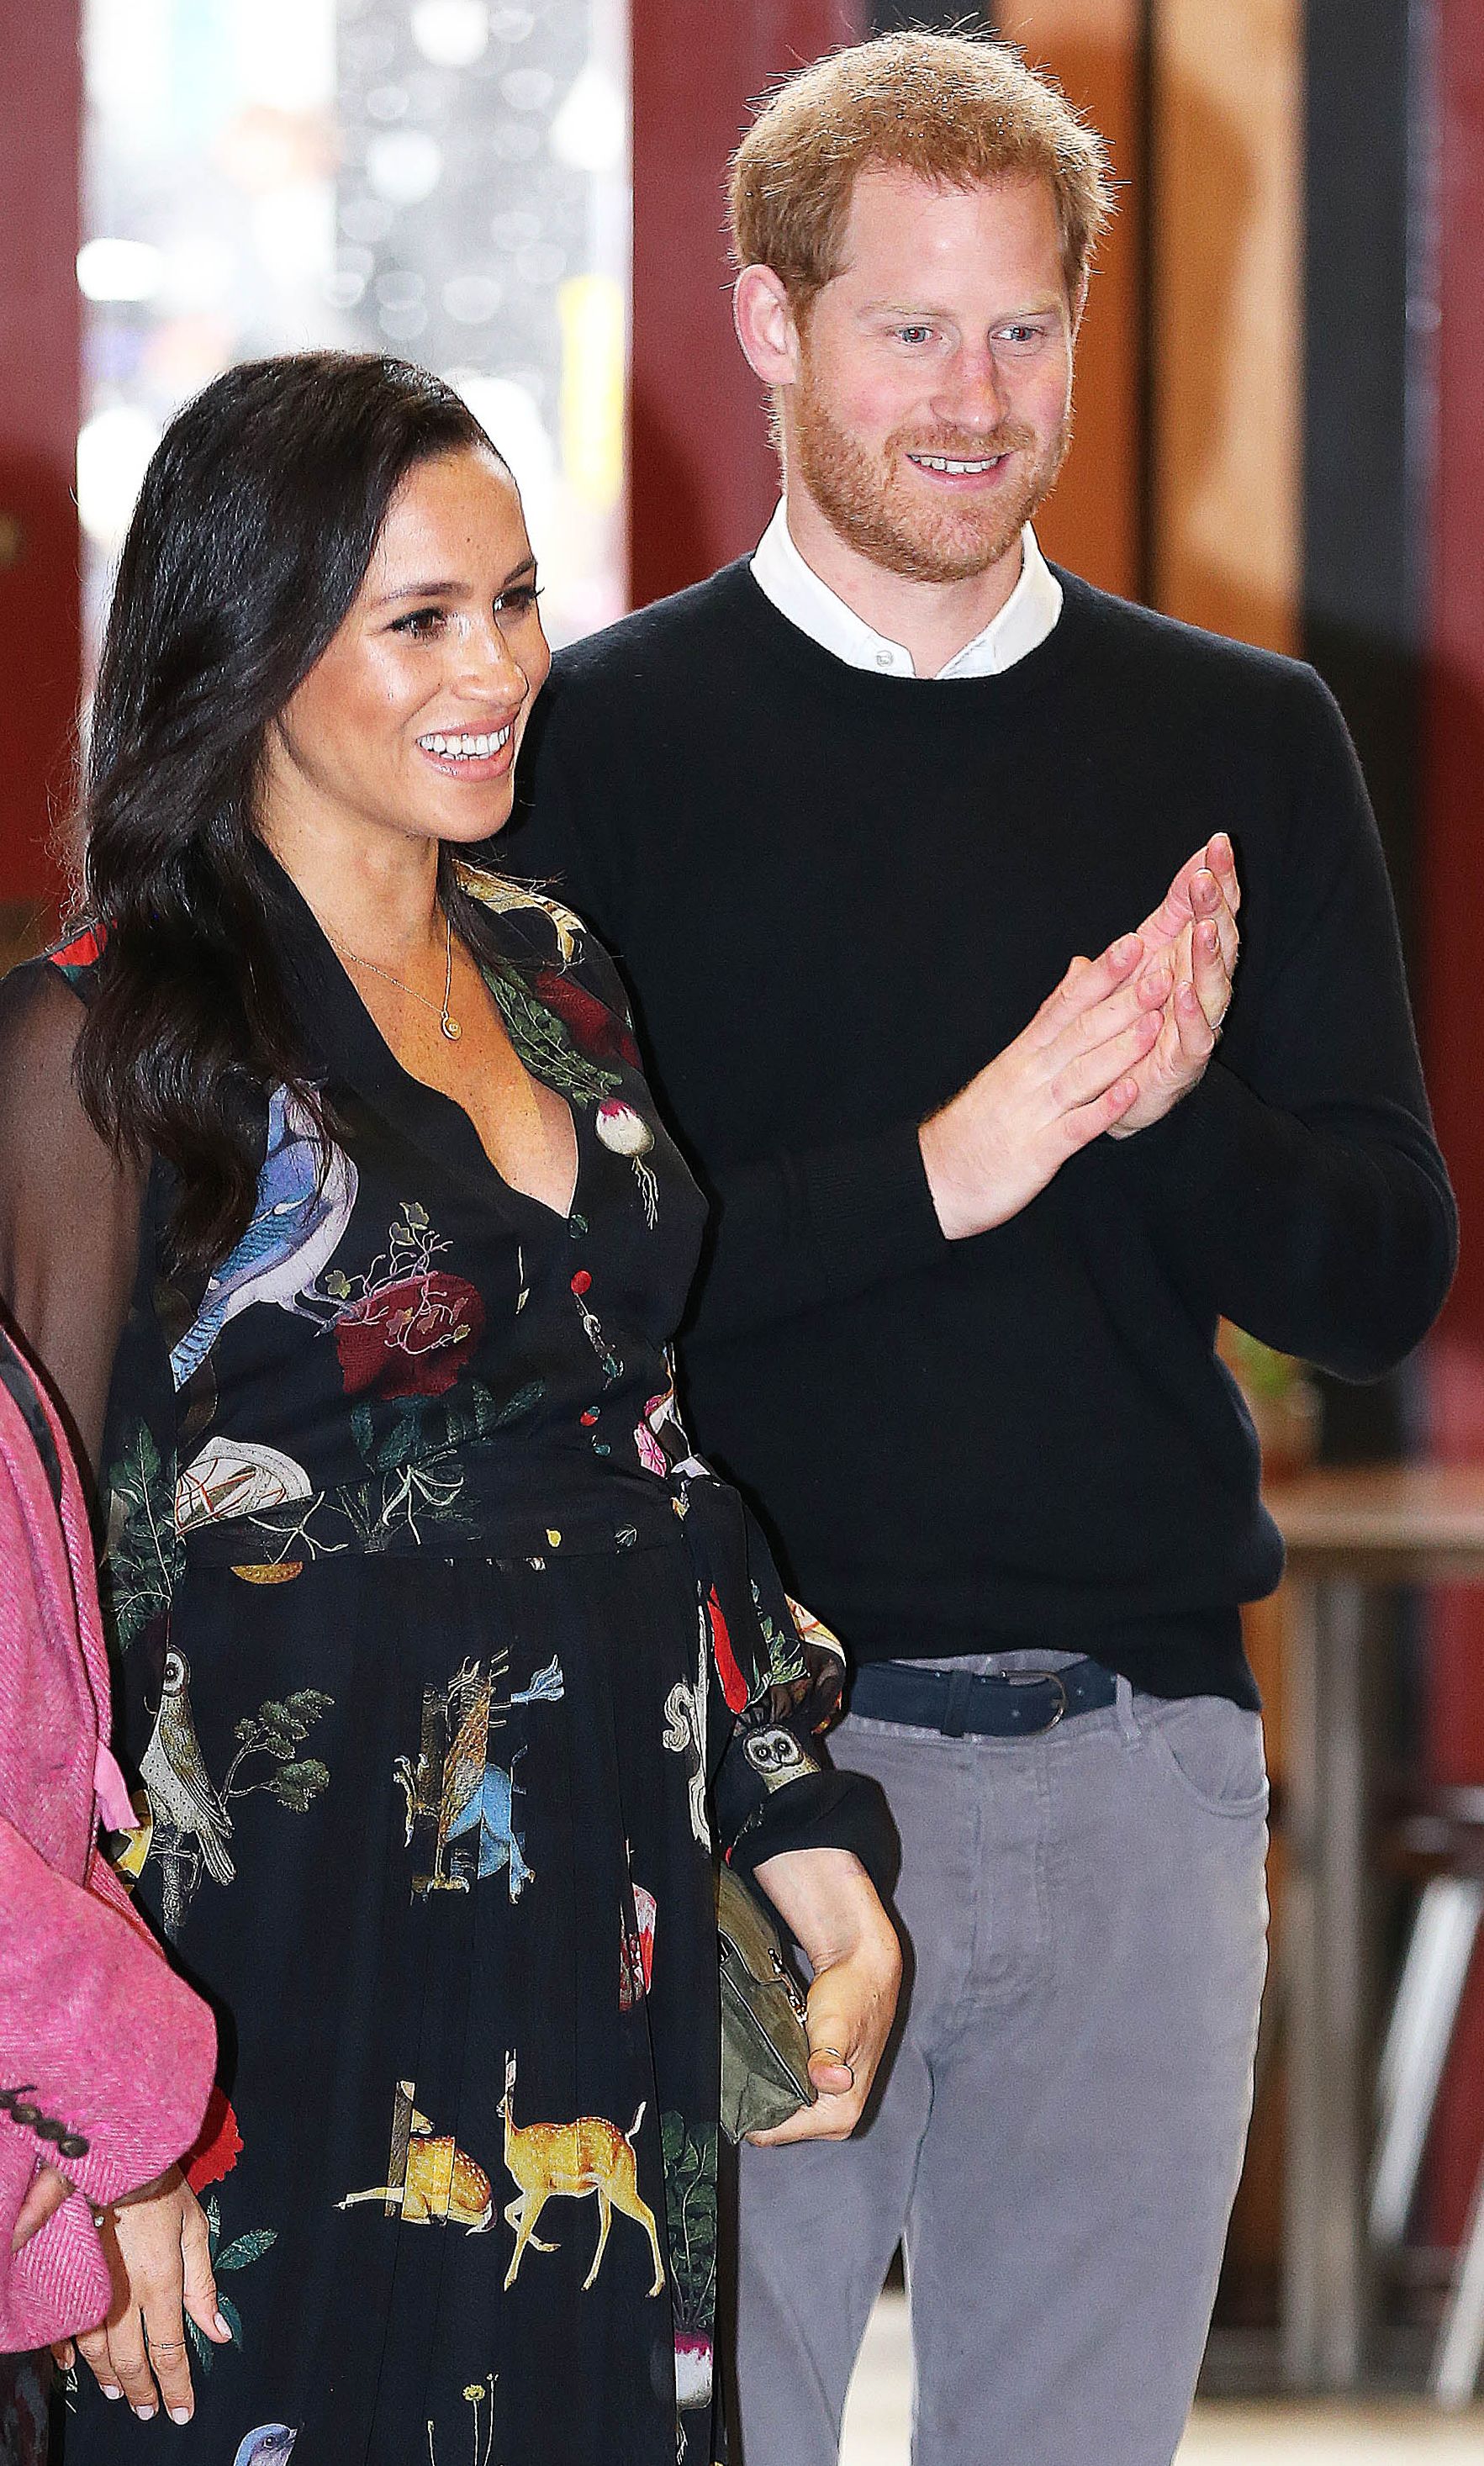 The Sussexes during a visit to the Bristol Old Vic Theatre, February, 2019. | Photo: Getty Images.